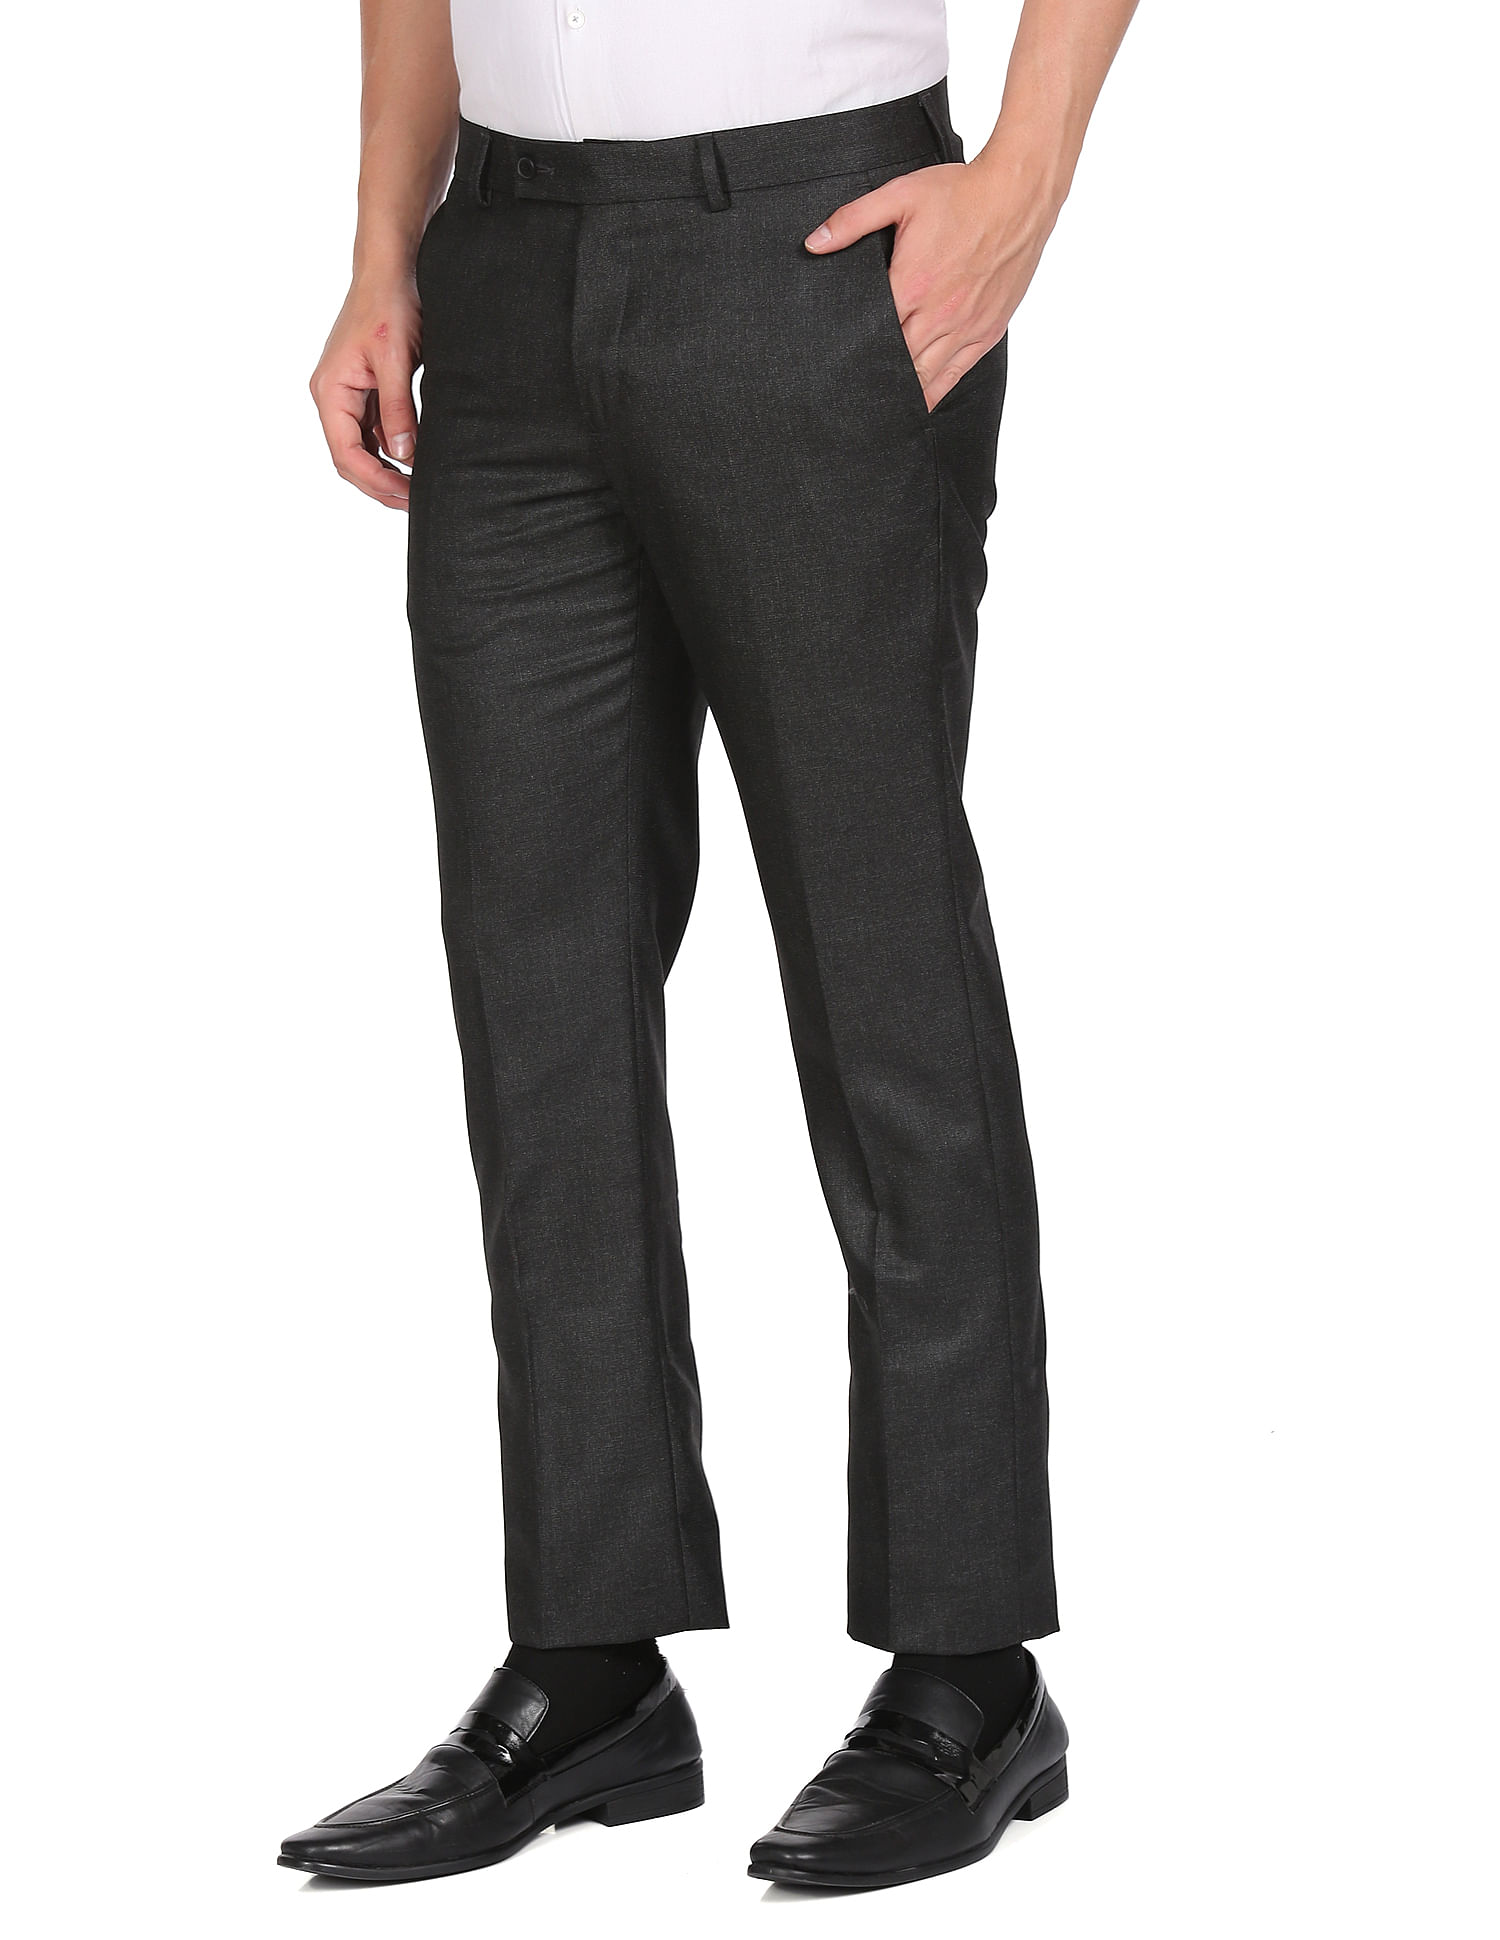 BSJ mens tailored trousers